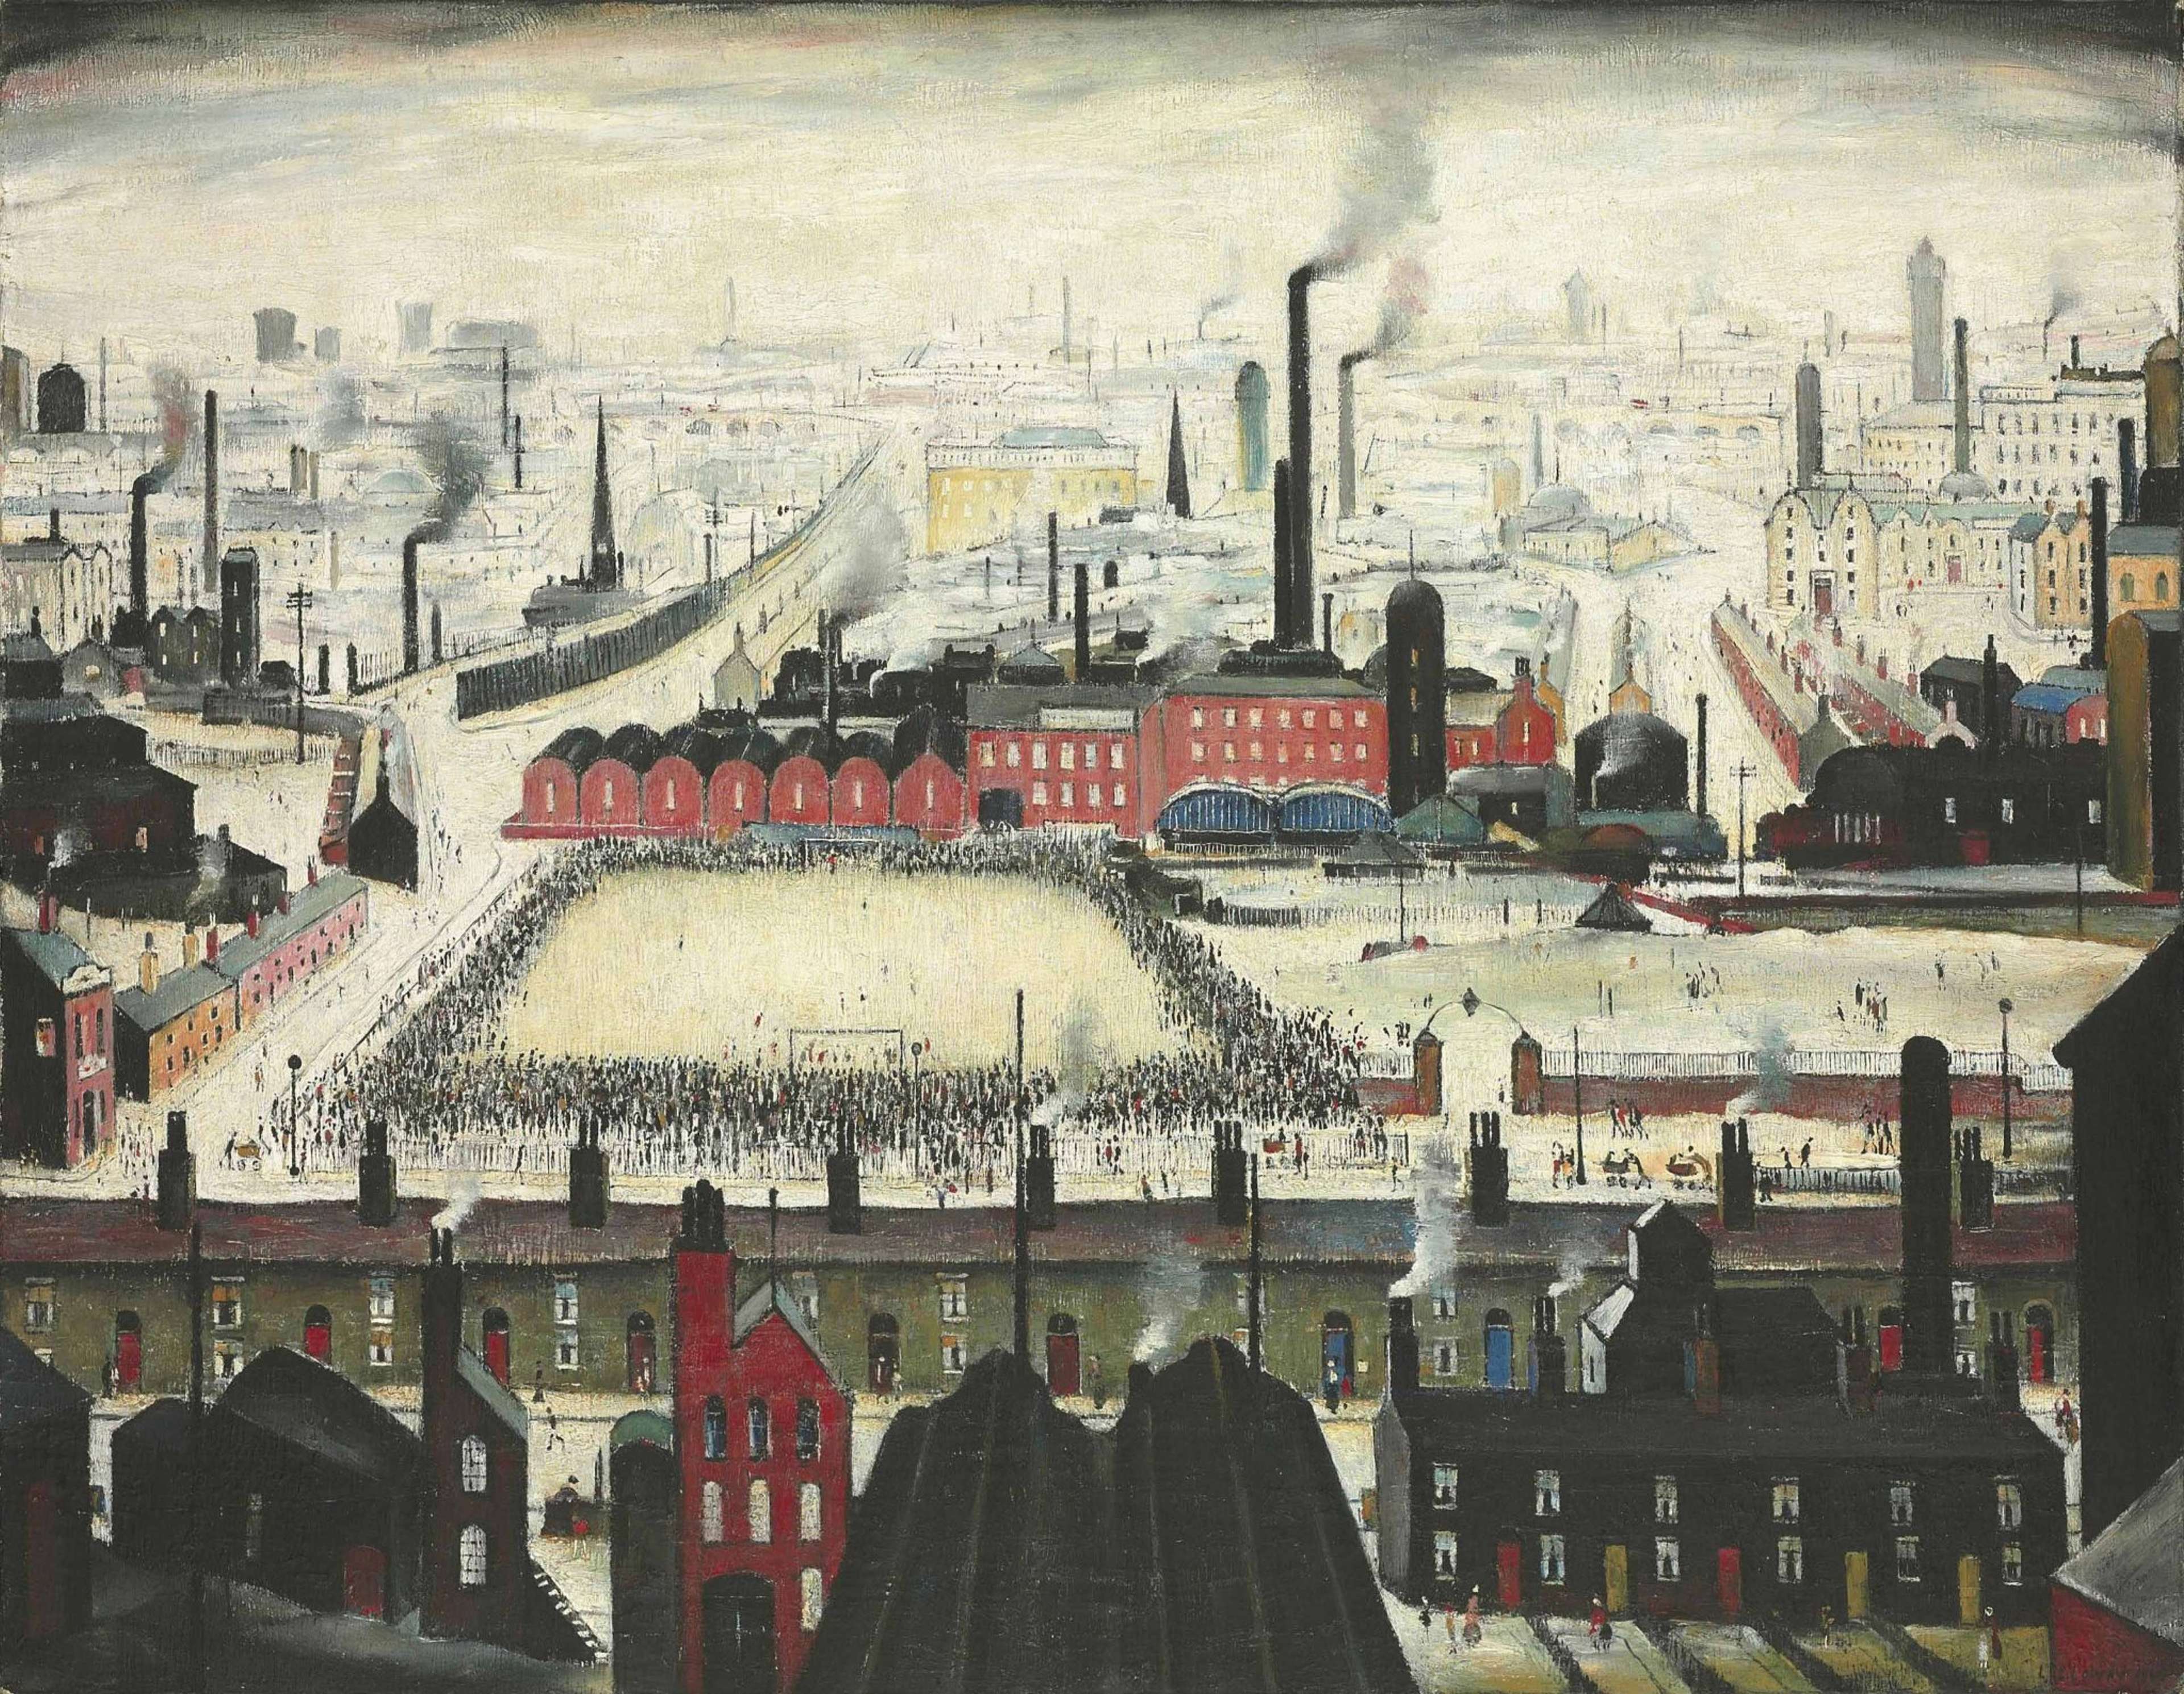 The Football Match by L S Lowry